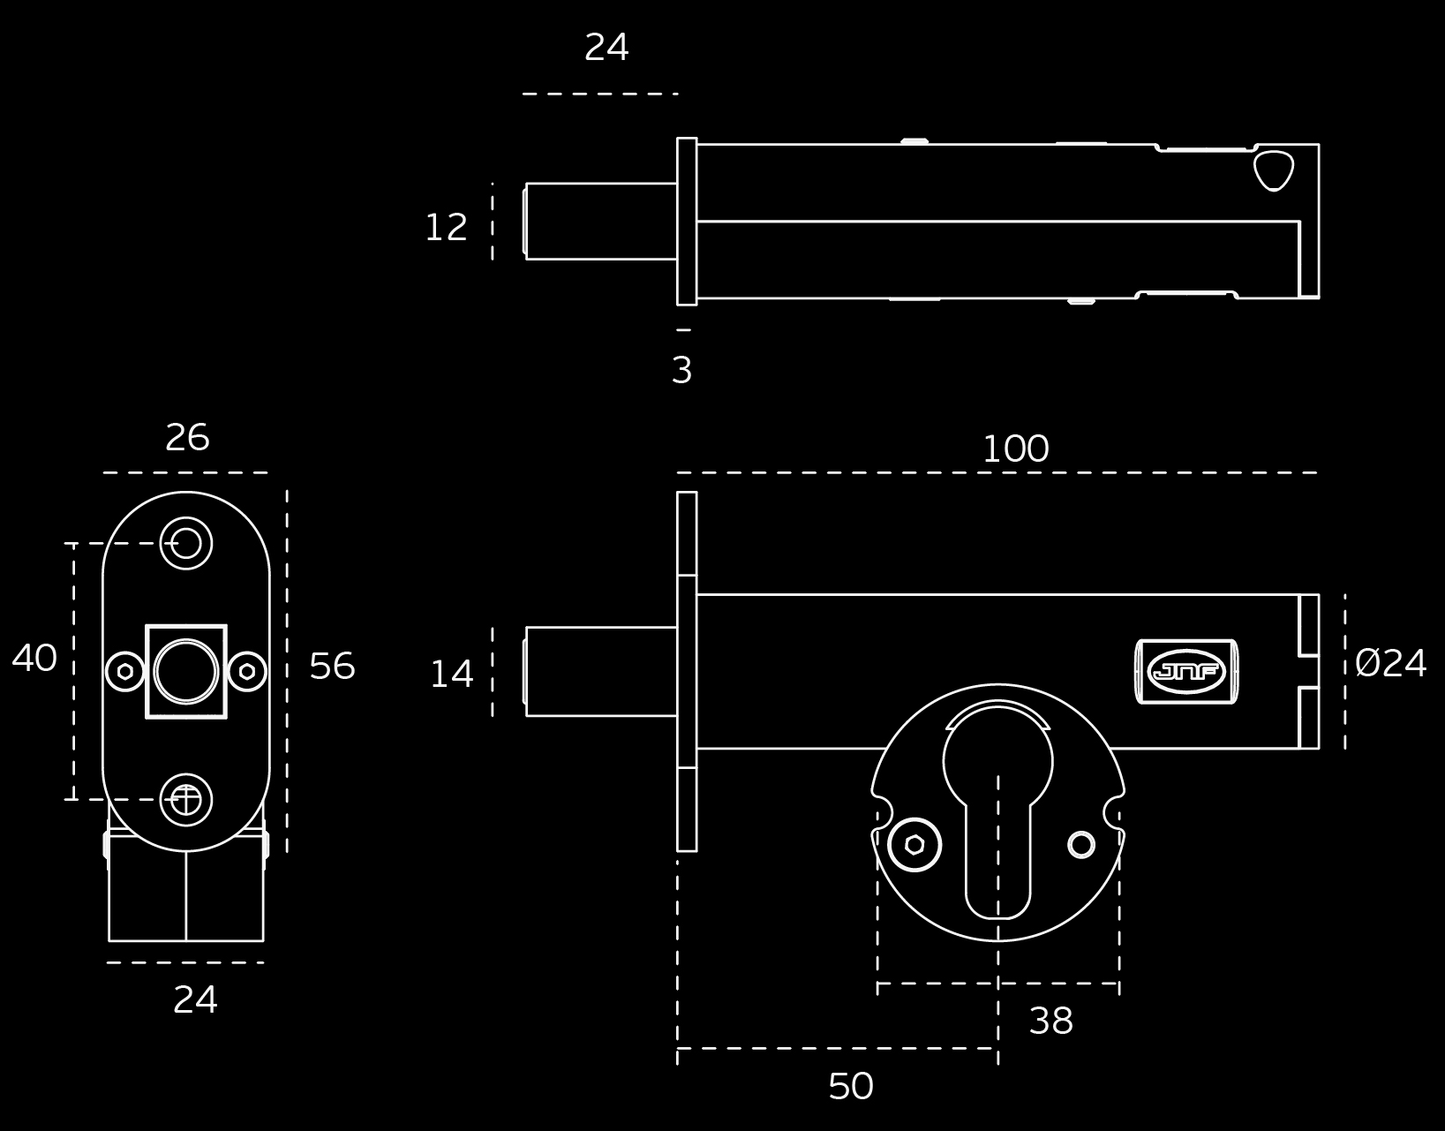 Architectural specification drawings in white on a black background for the euro deadbolt.